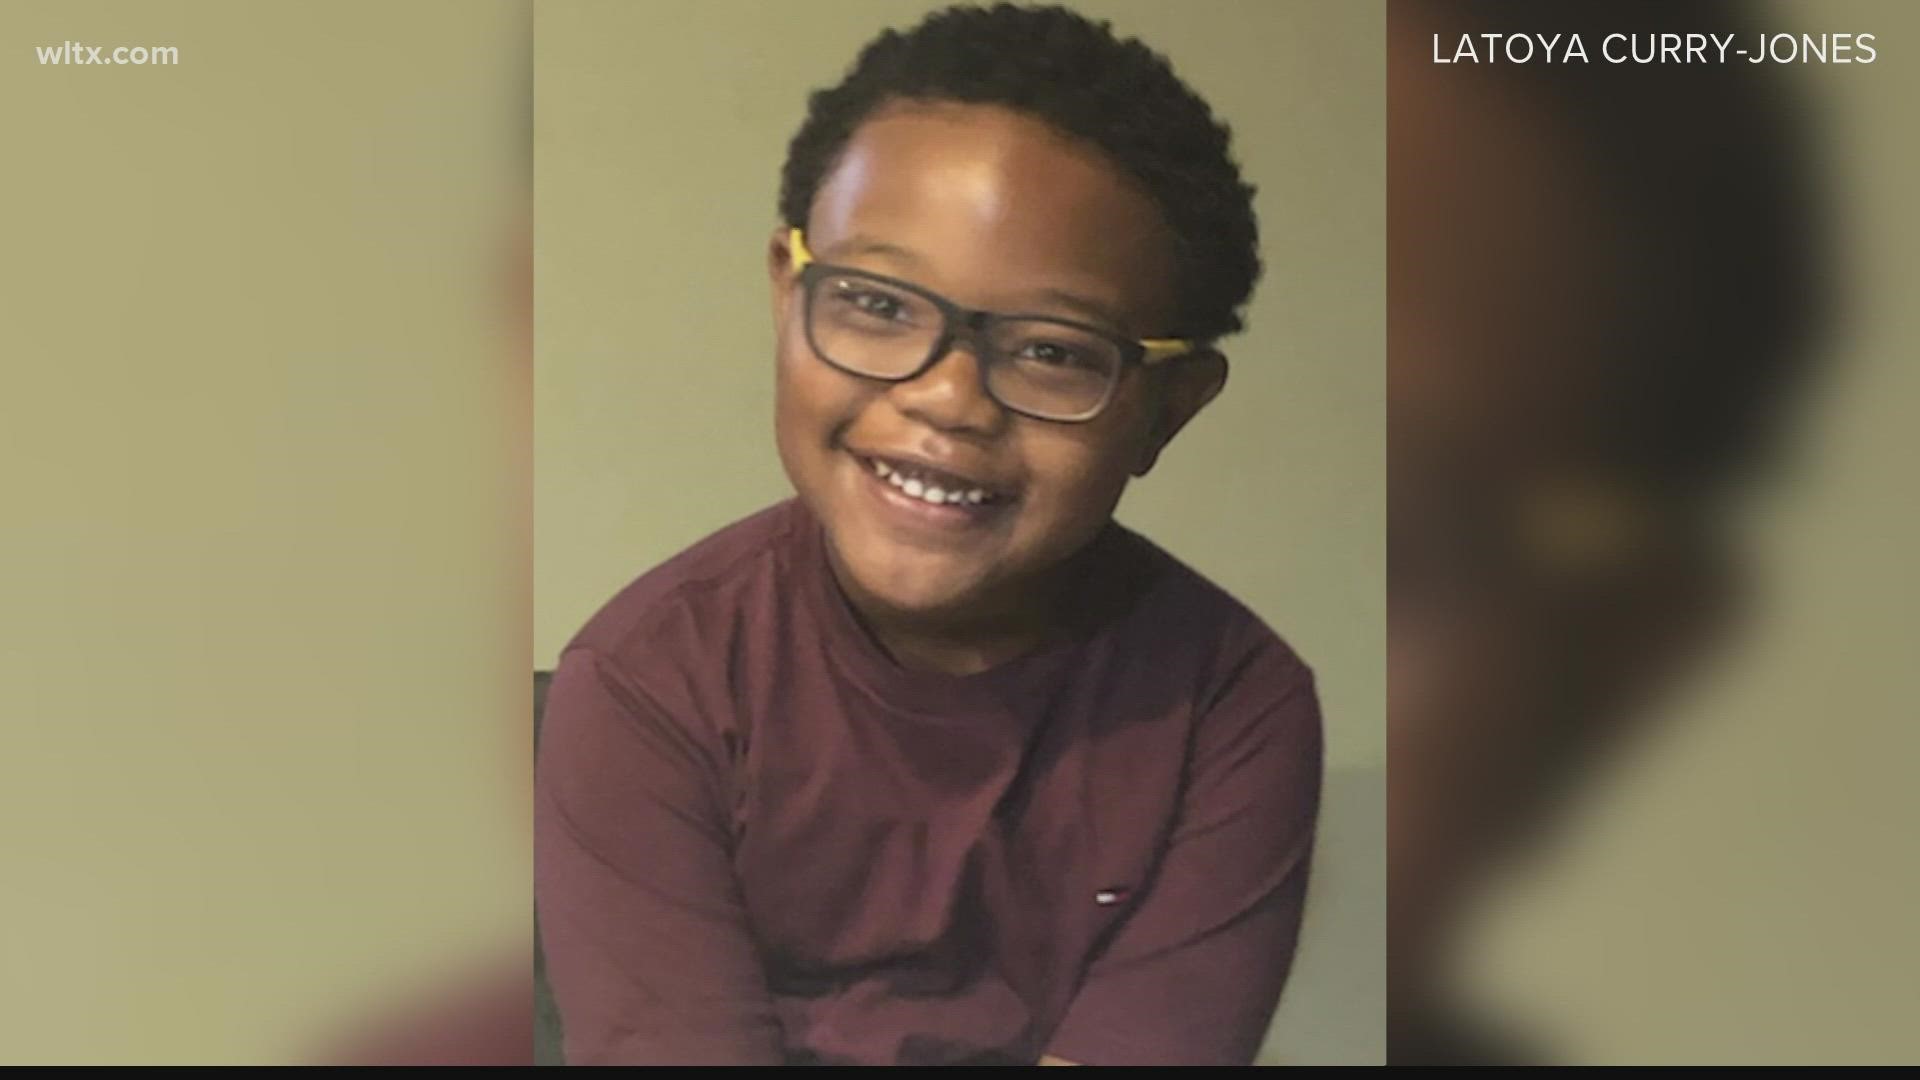 A normal lunch hour at a Midlands elementary school quickly turned into an emergency when teachers saw 6-year-old kindergartener Wells Jones slumped over.